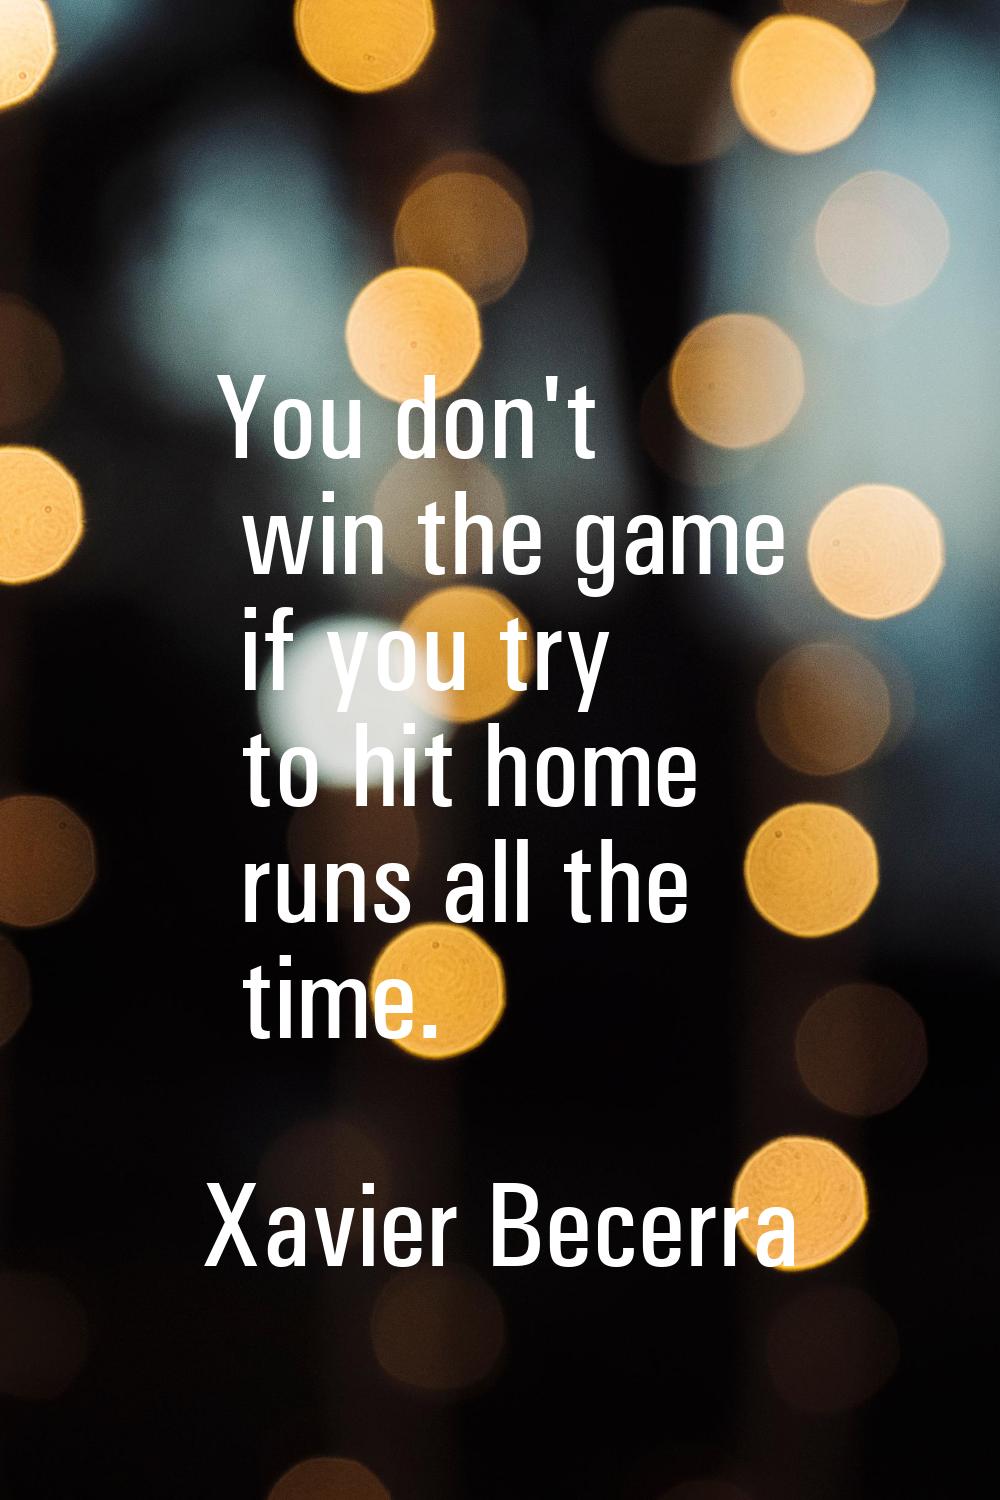 You don't win the game if you try to hit home runs all the time.